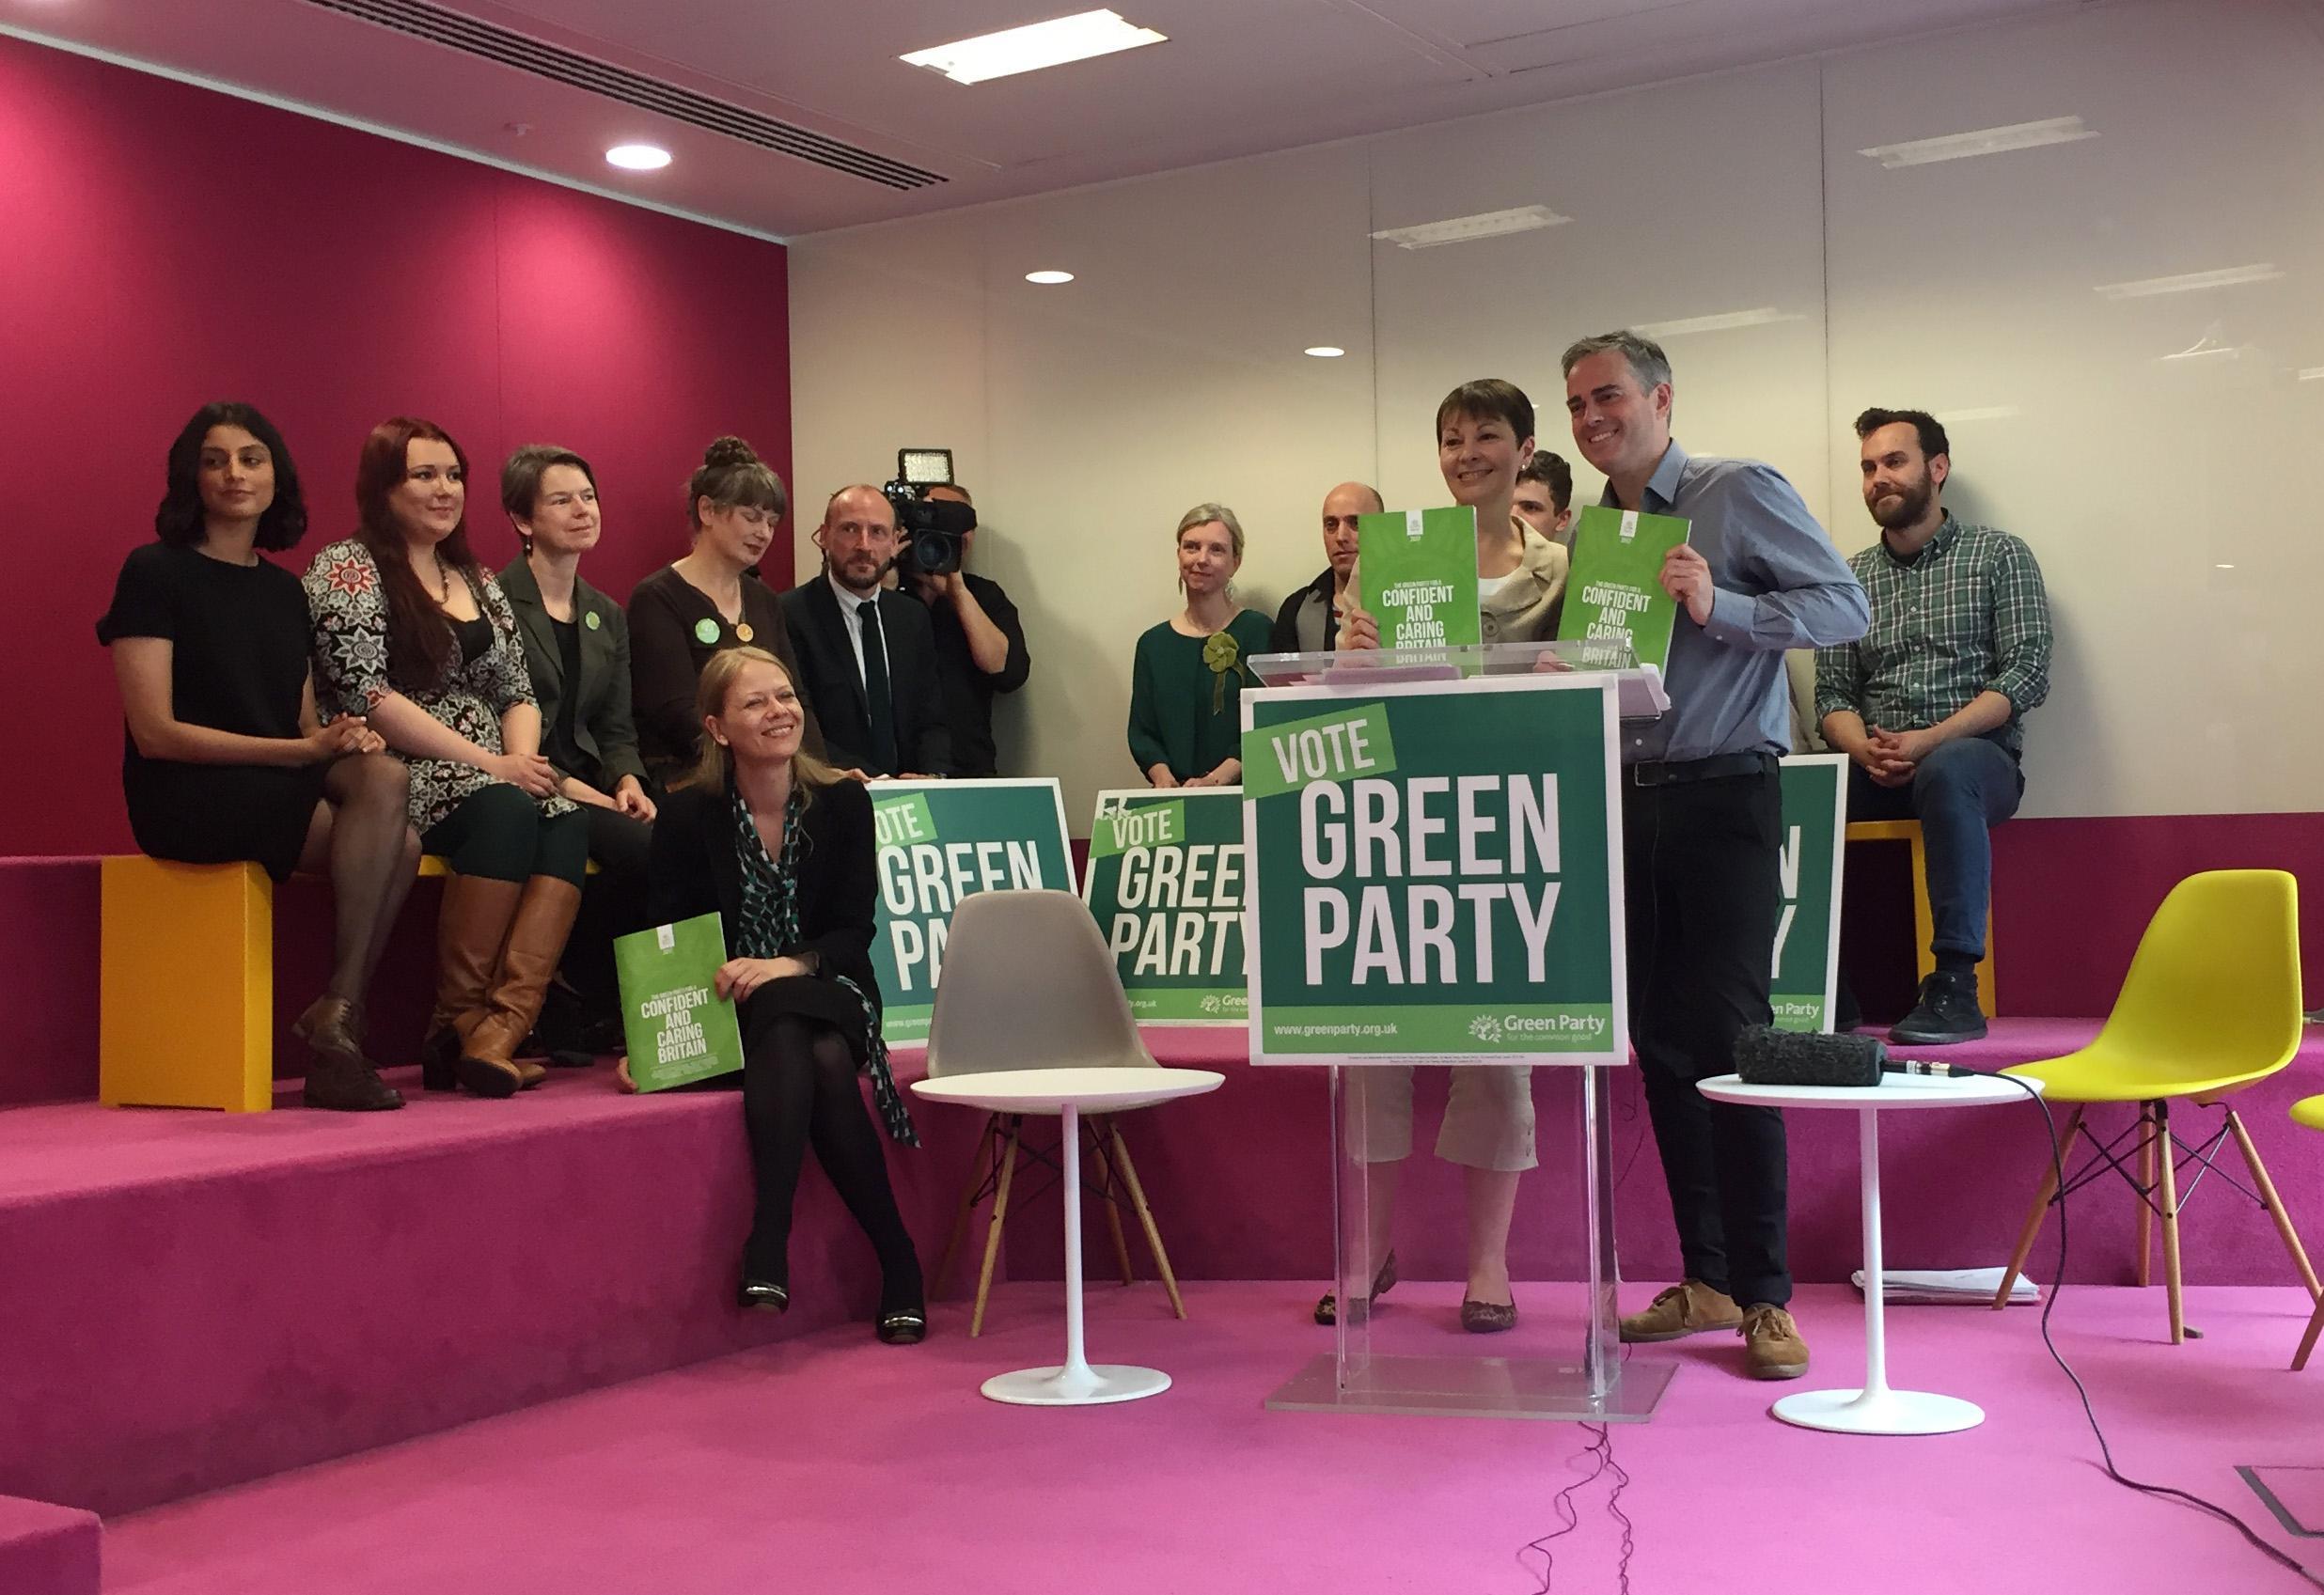 Green Party co-leaders Caroline Lucas and Jonathan Bartley launch the party's ‘Green Guarantee’, setting out the key priorities for MPs elected to Parliament, at Wayra Offices in London